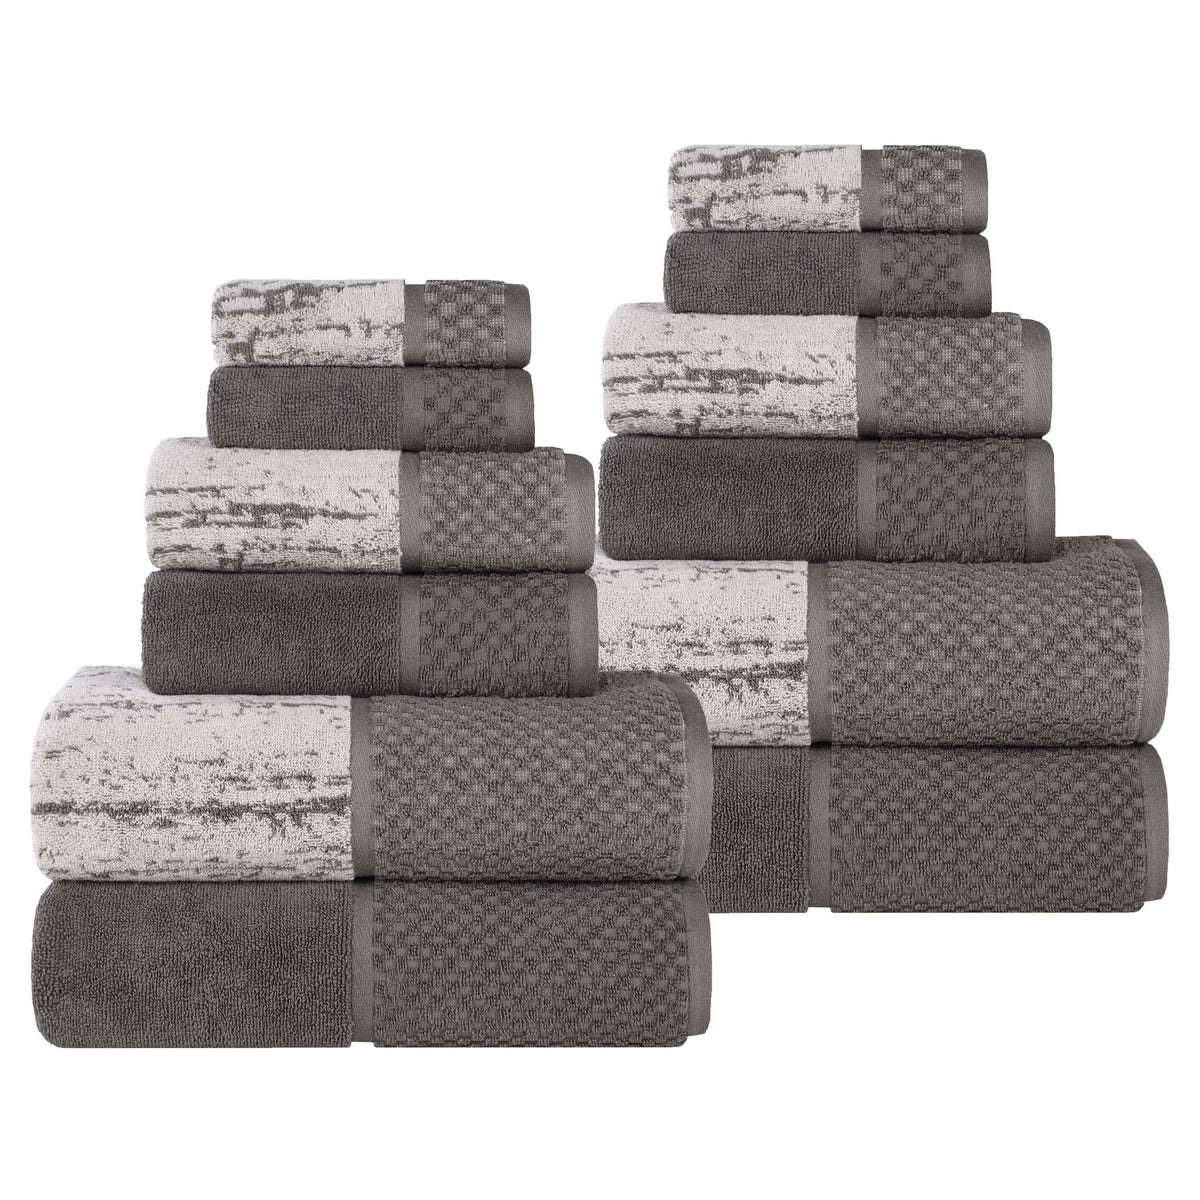 Lodie Cotton Jacquard Solid and Two-Toned 12 Piece Assorted Towel Set - Charcoal-Silver